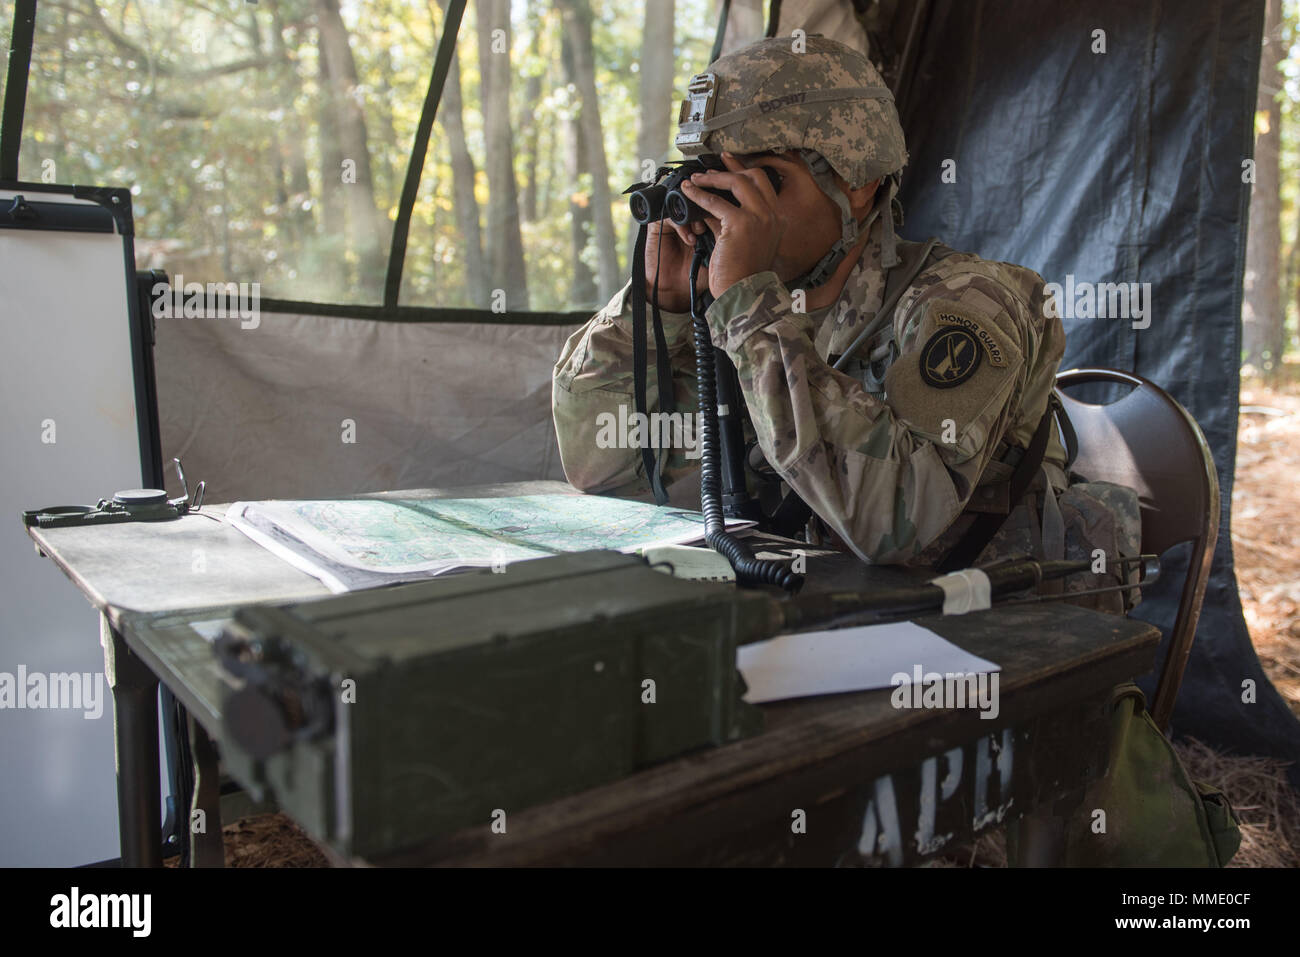 https://c8.alamy.com/comp/MME0CF/soldiers-assigned-to-the-3d-us-infantry-regiment-the-old-guard-participate-in-land-navigation-and-patrol-training-for-the-expert-infantryman-badge-eib-on-fort-ap-hill-va-oct-24-2017-land-navigation-and-patrol-lane-tasks-are-just-two-of-a-number-of-skills-infantryman-must-perfect-in-order-to-earn-their-expert-infantryman-badge-other-skills-include-first-aid-training-weapon-proficiency-moving-under-direct-fire-and-a-12-mile-foot-march-MME0CF.jpg